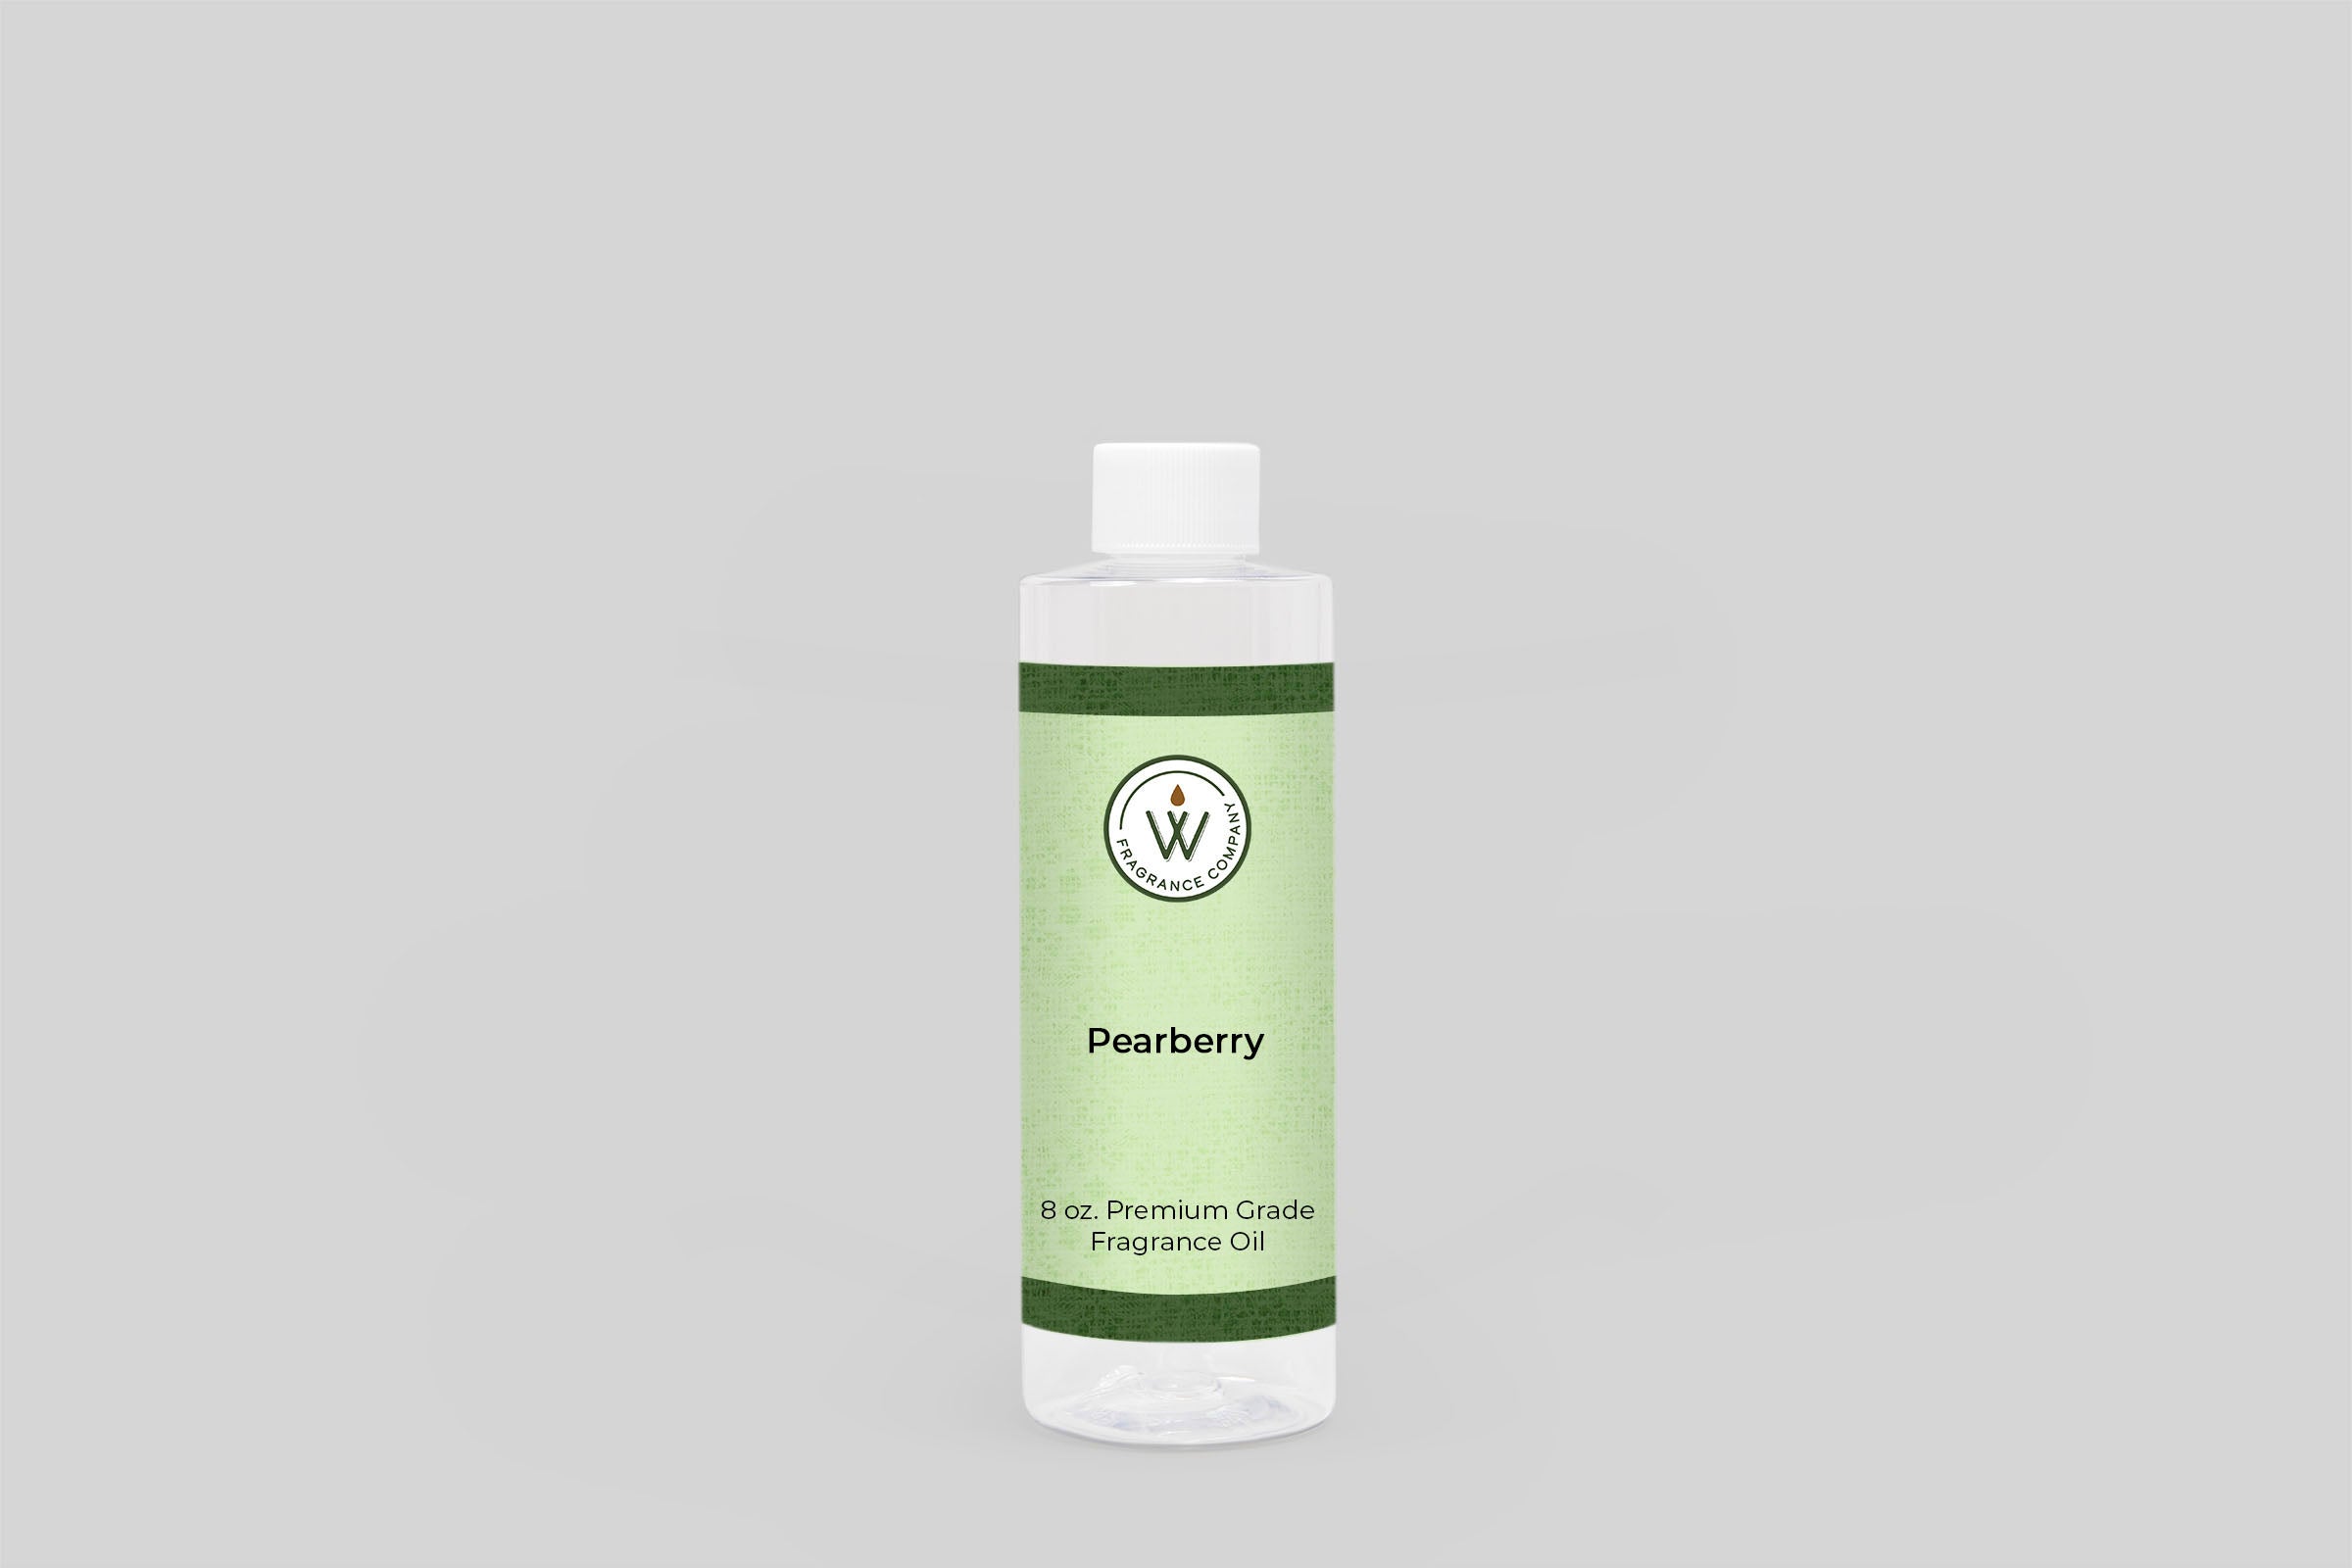 Pearberry Fragrance Oil